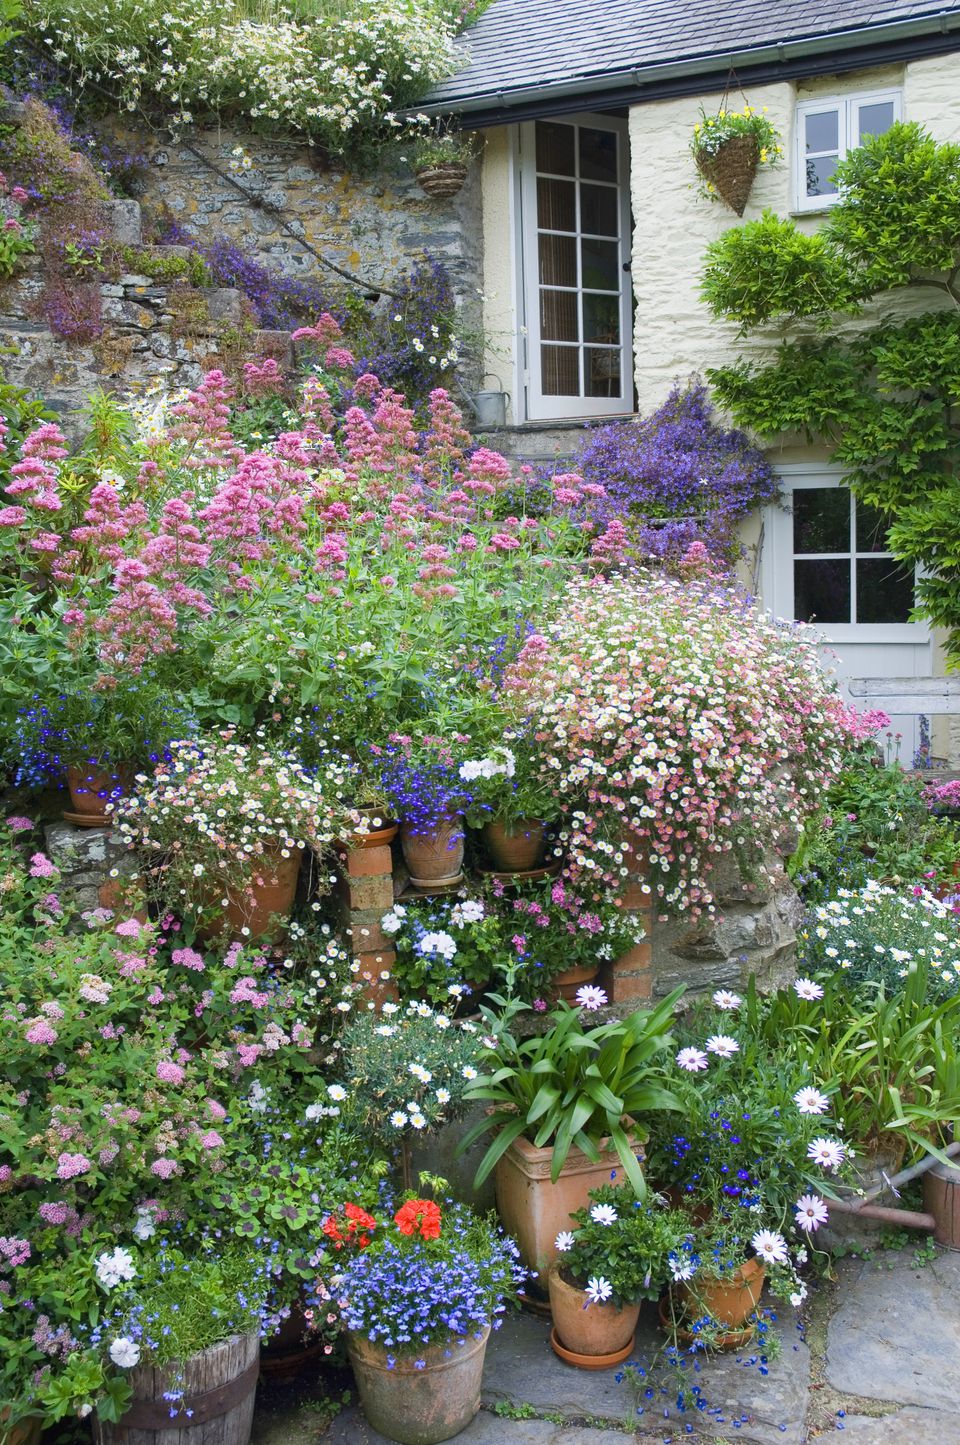 12 Ideas for Flowering Container Gardens